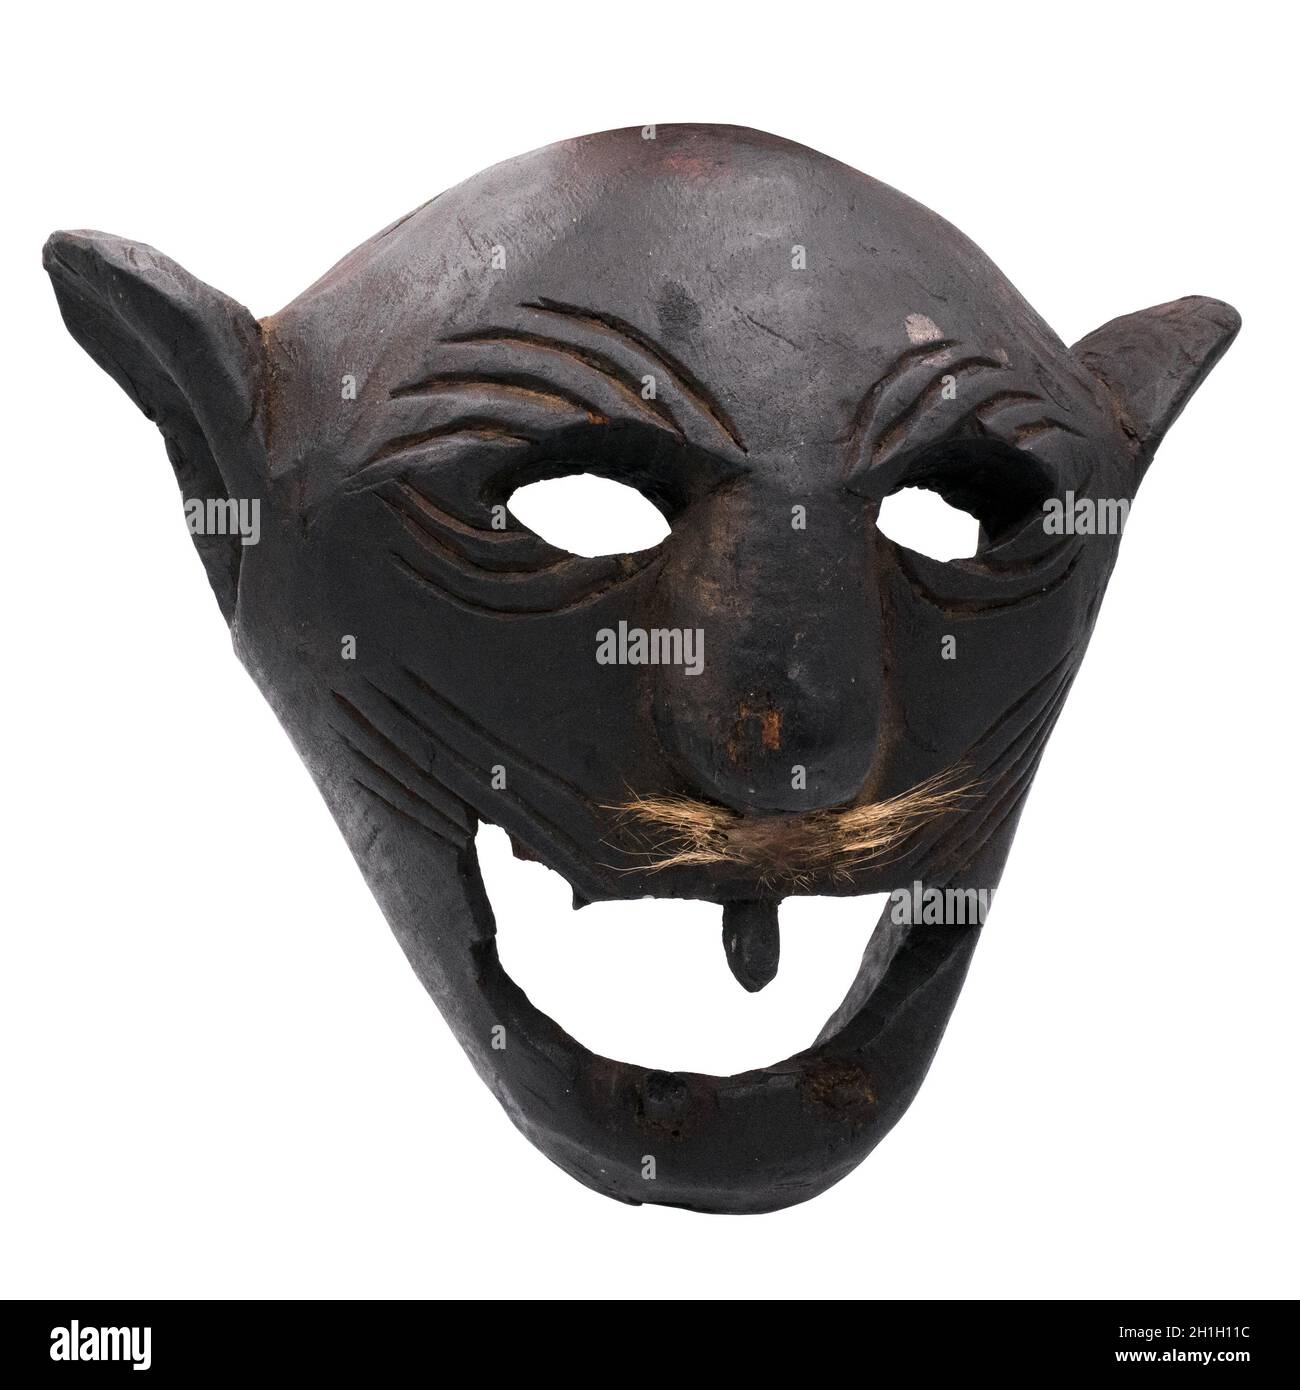 Antique Gurung or Magar Ritual Wooden Mask from the Middle Hills of Nepal. Hand-carved hardwood shaman mask Stock Photo